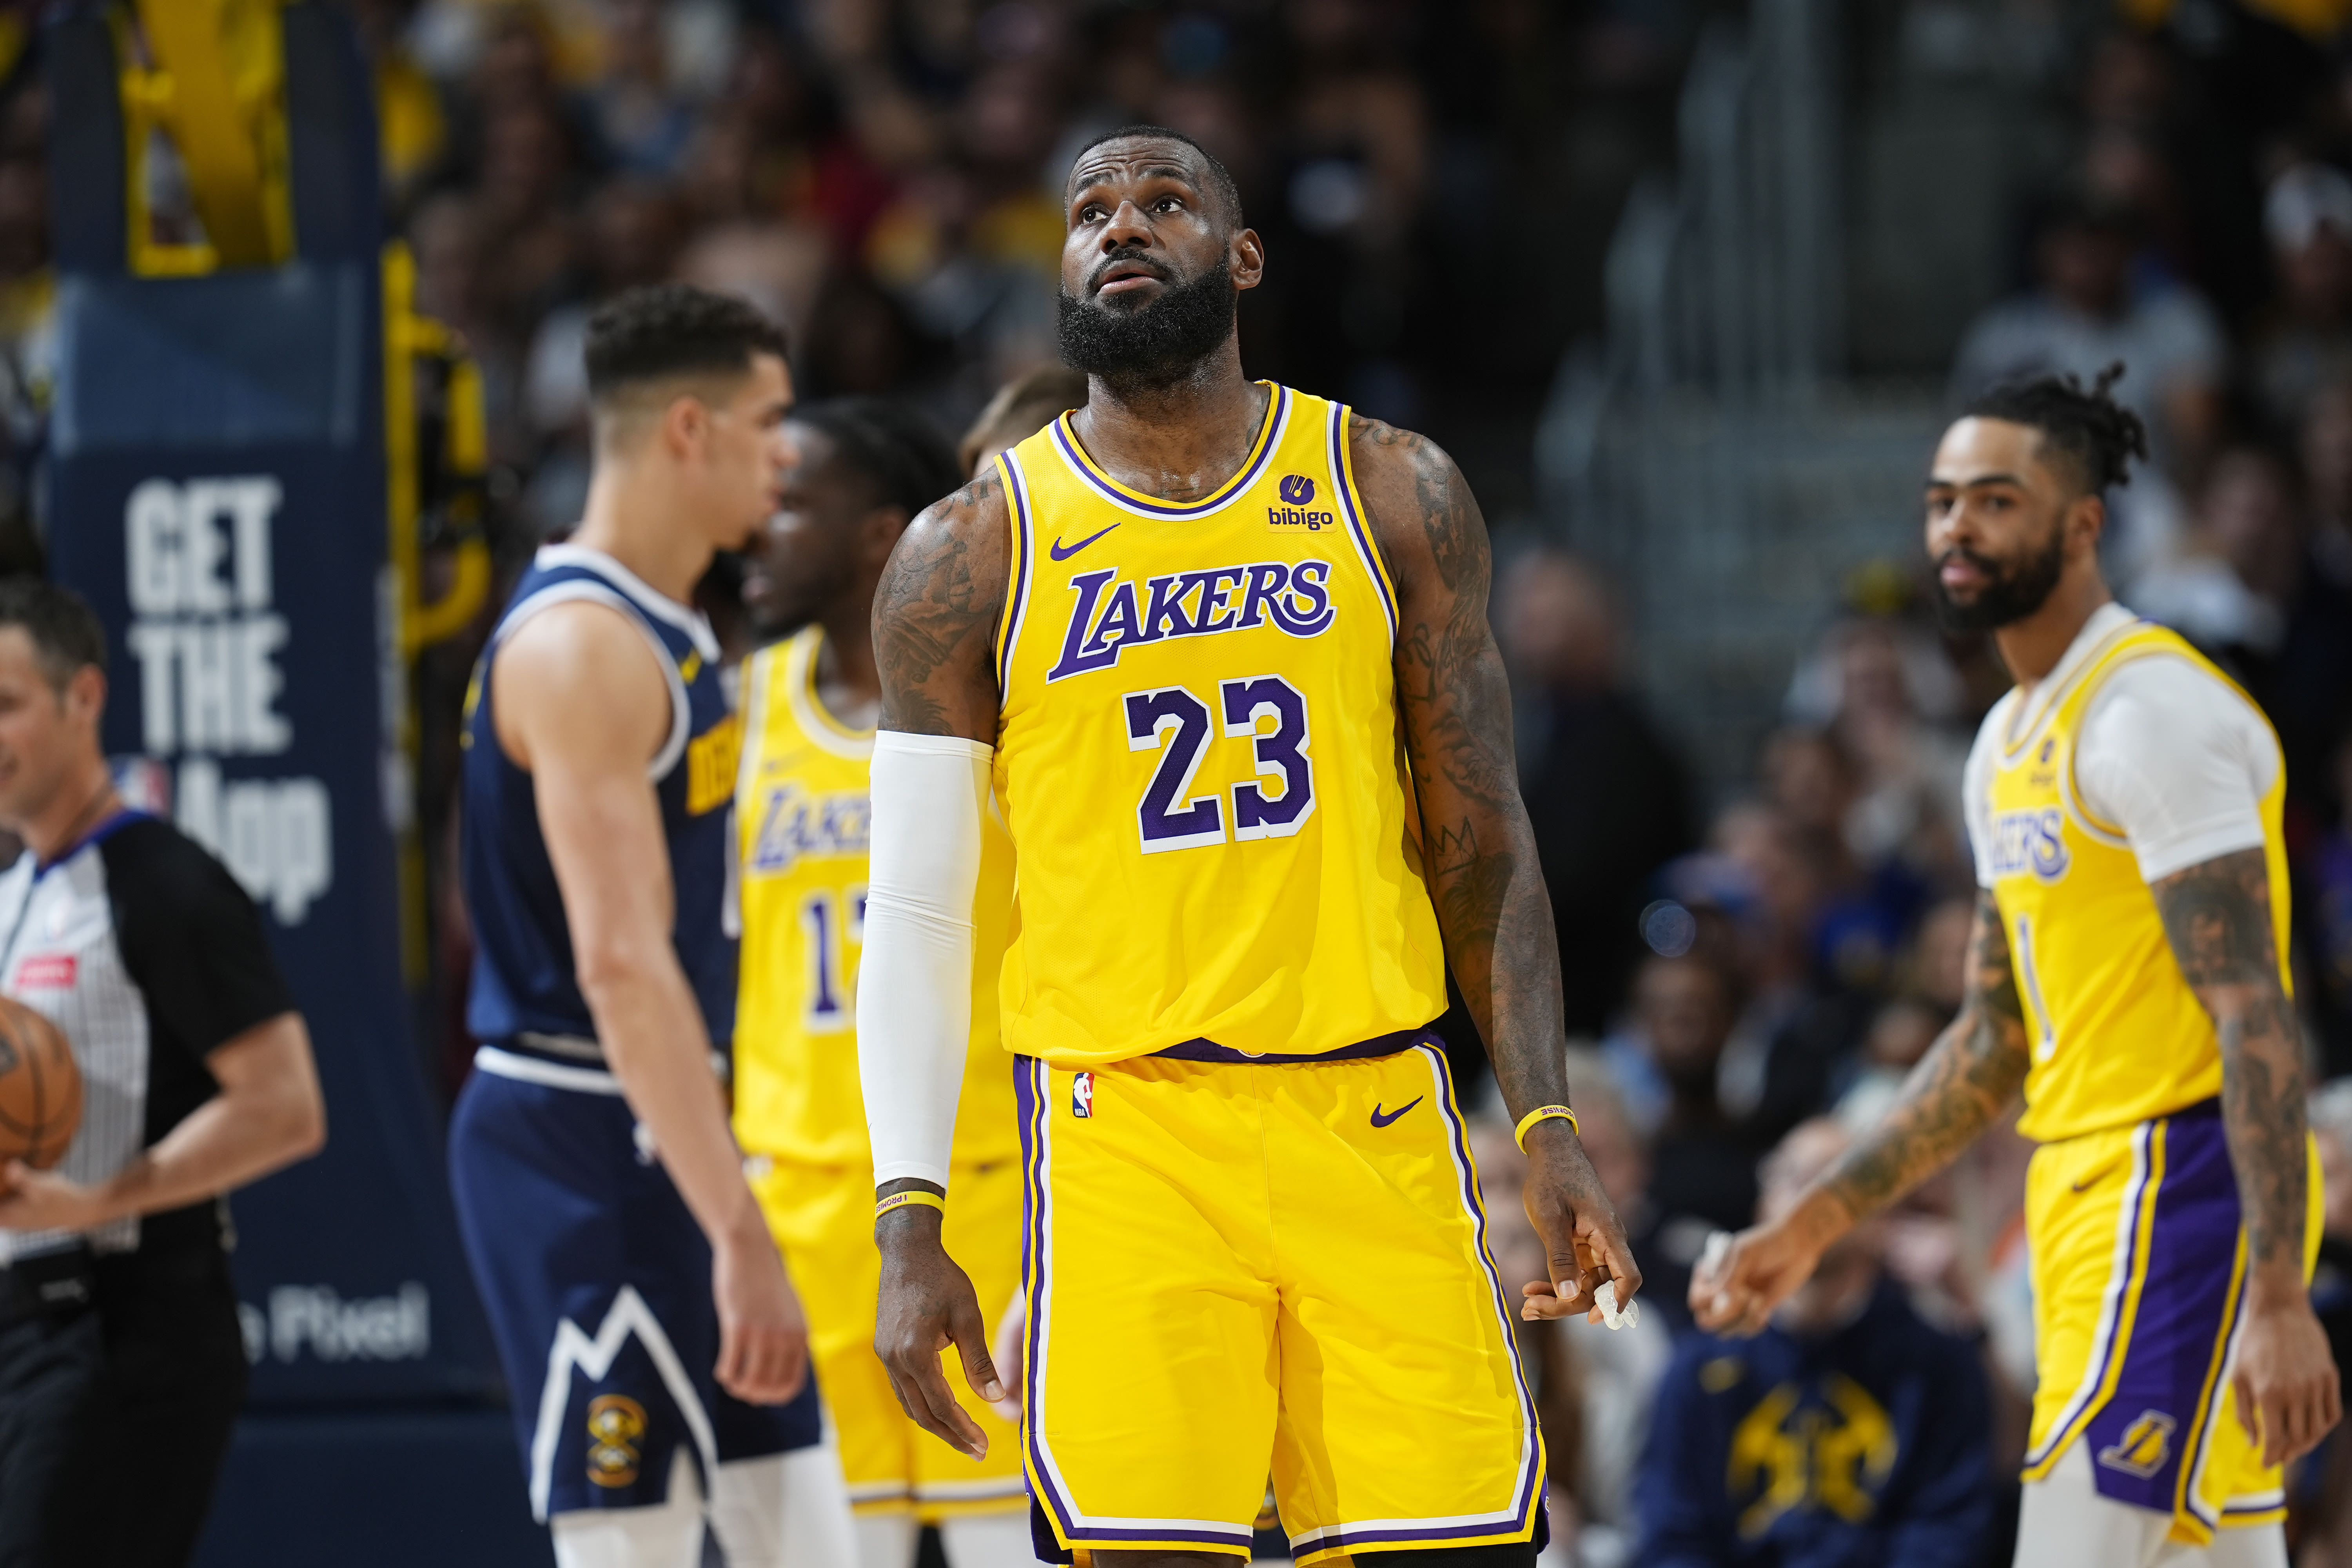 The Sports Report: Lakers' season comes to a mediocre end